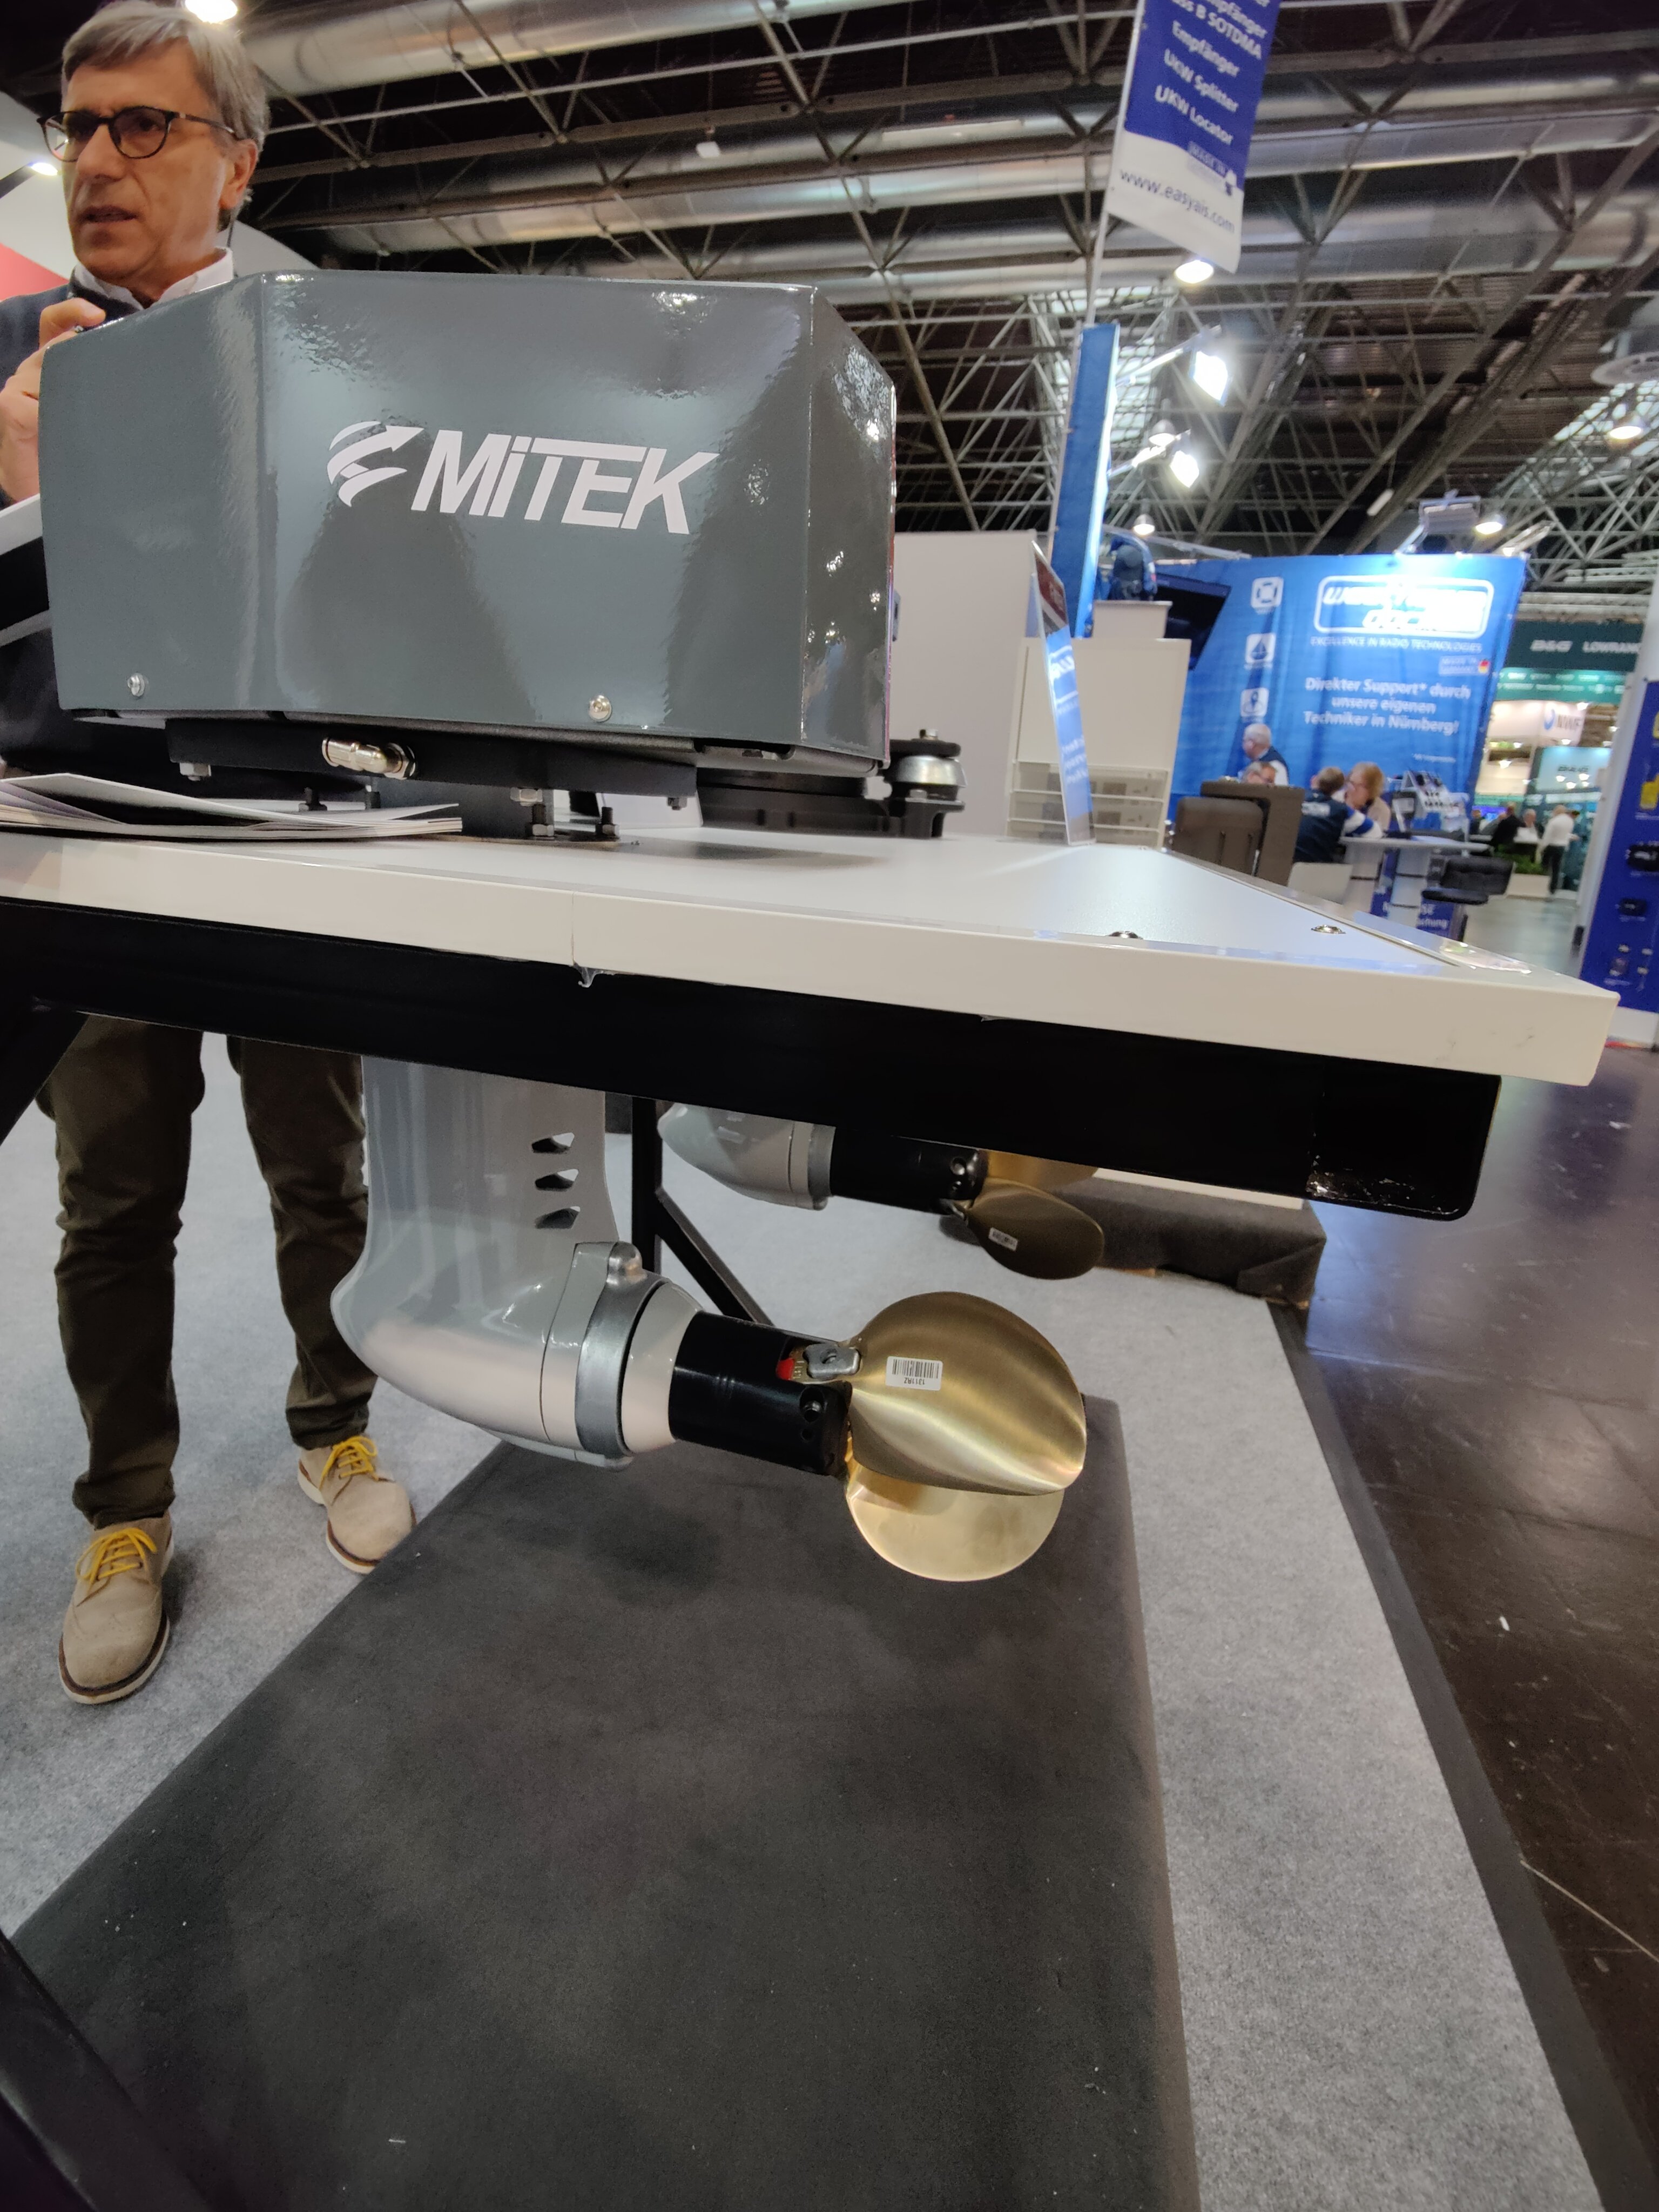 Do you have any questions about the Mitek 5 kW pod motor?